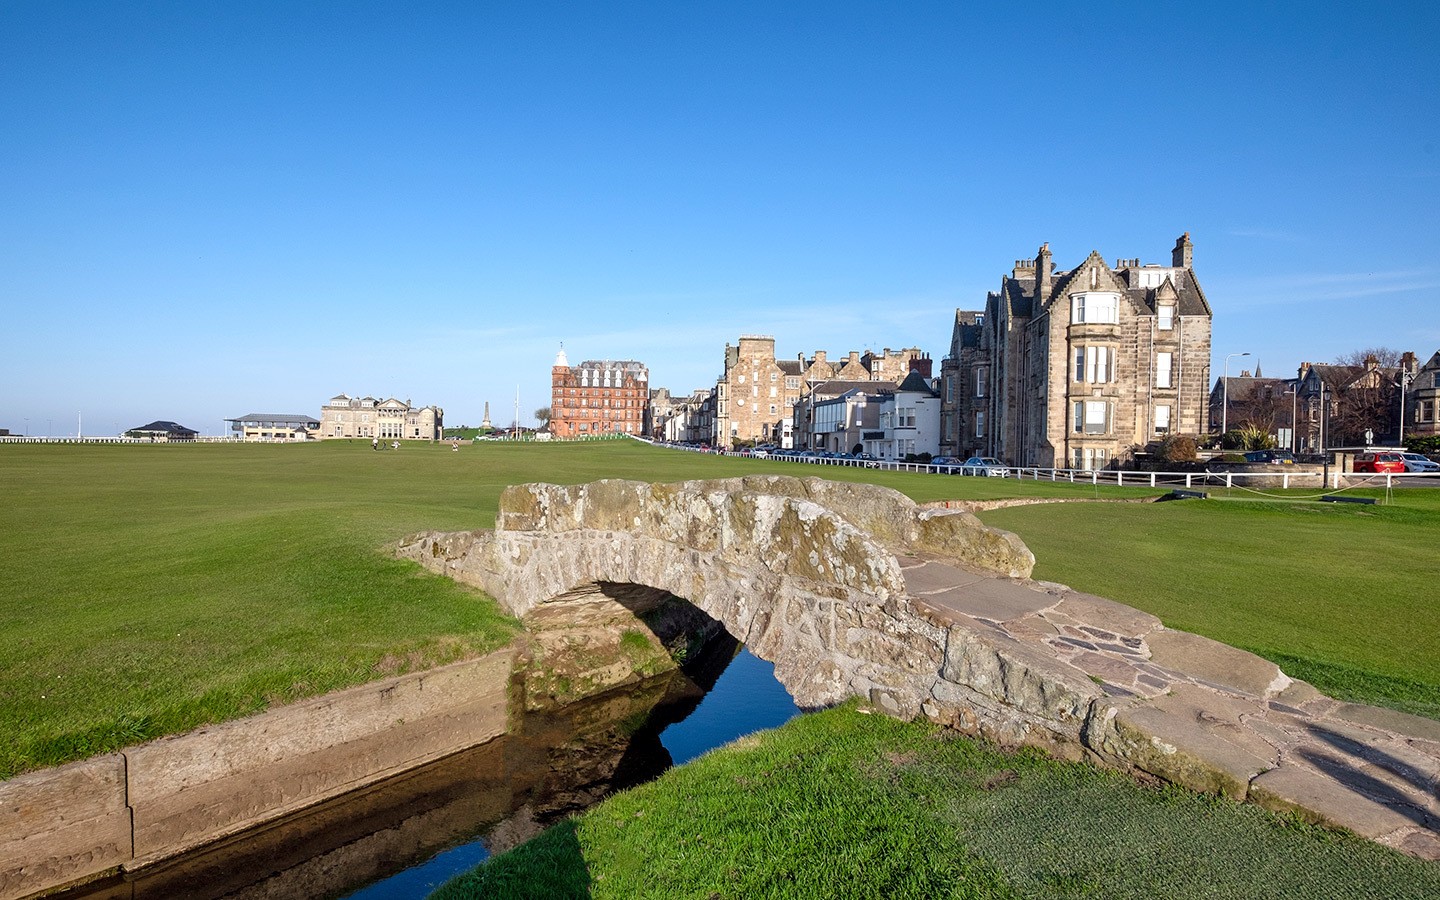 The Swilcan Bridge on the Old Course – home of golf in St Andrews